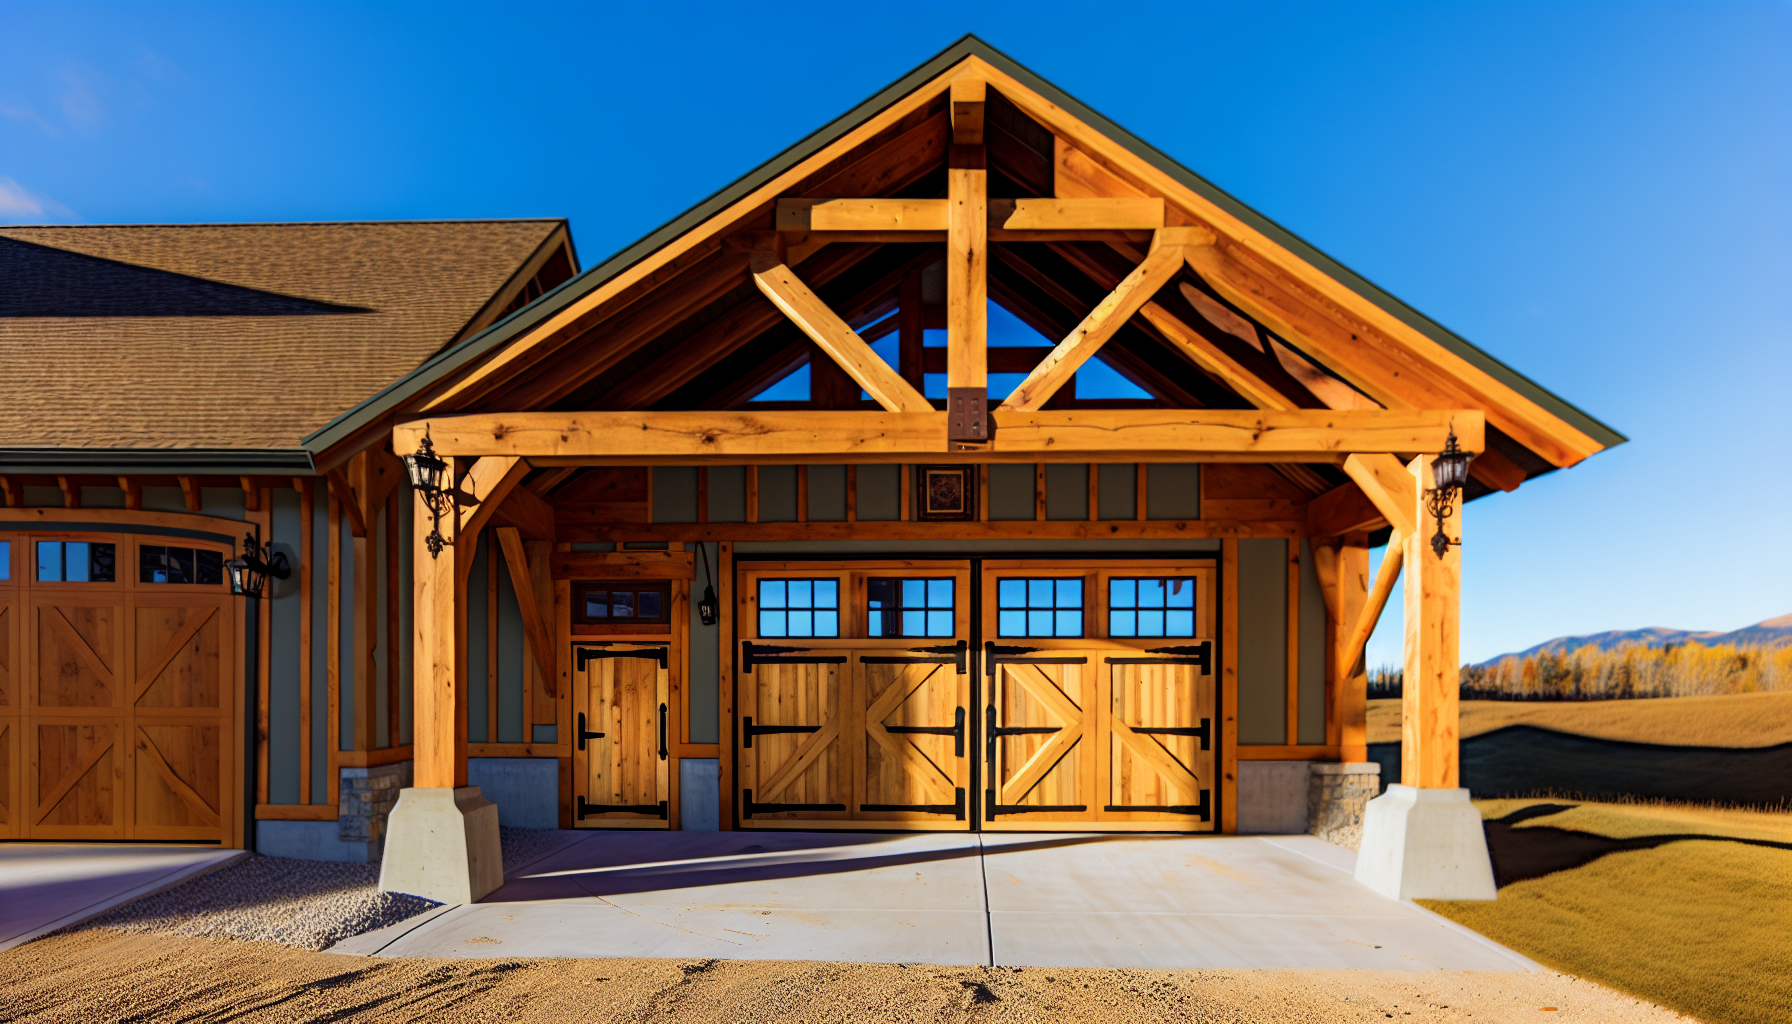 Customized timber frame garage with unique windows and doors